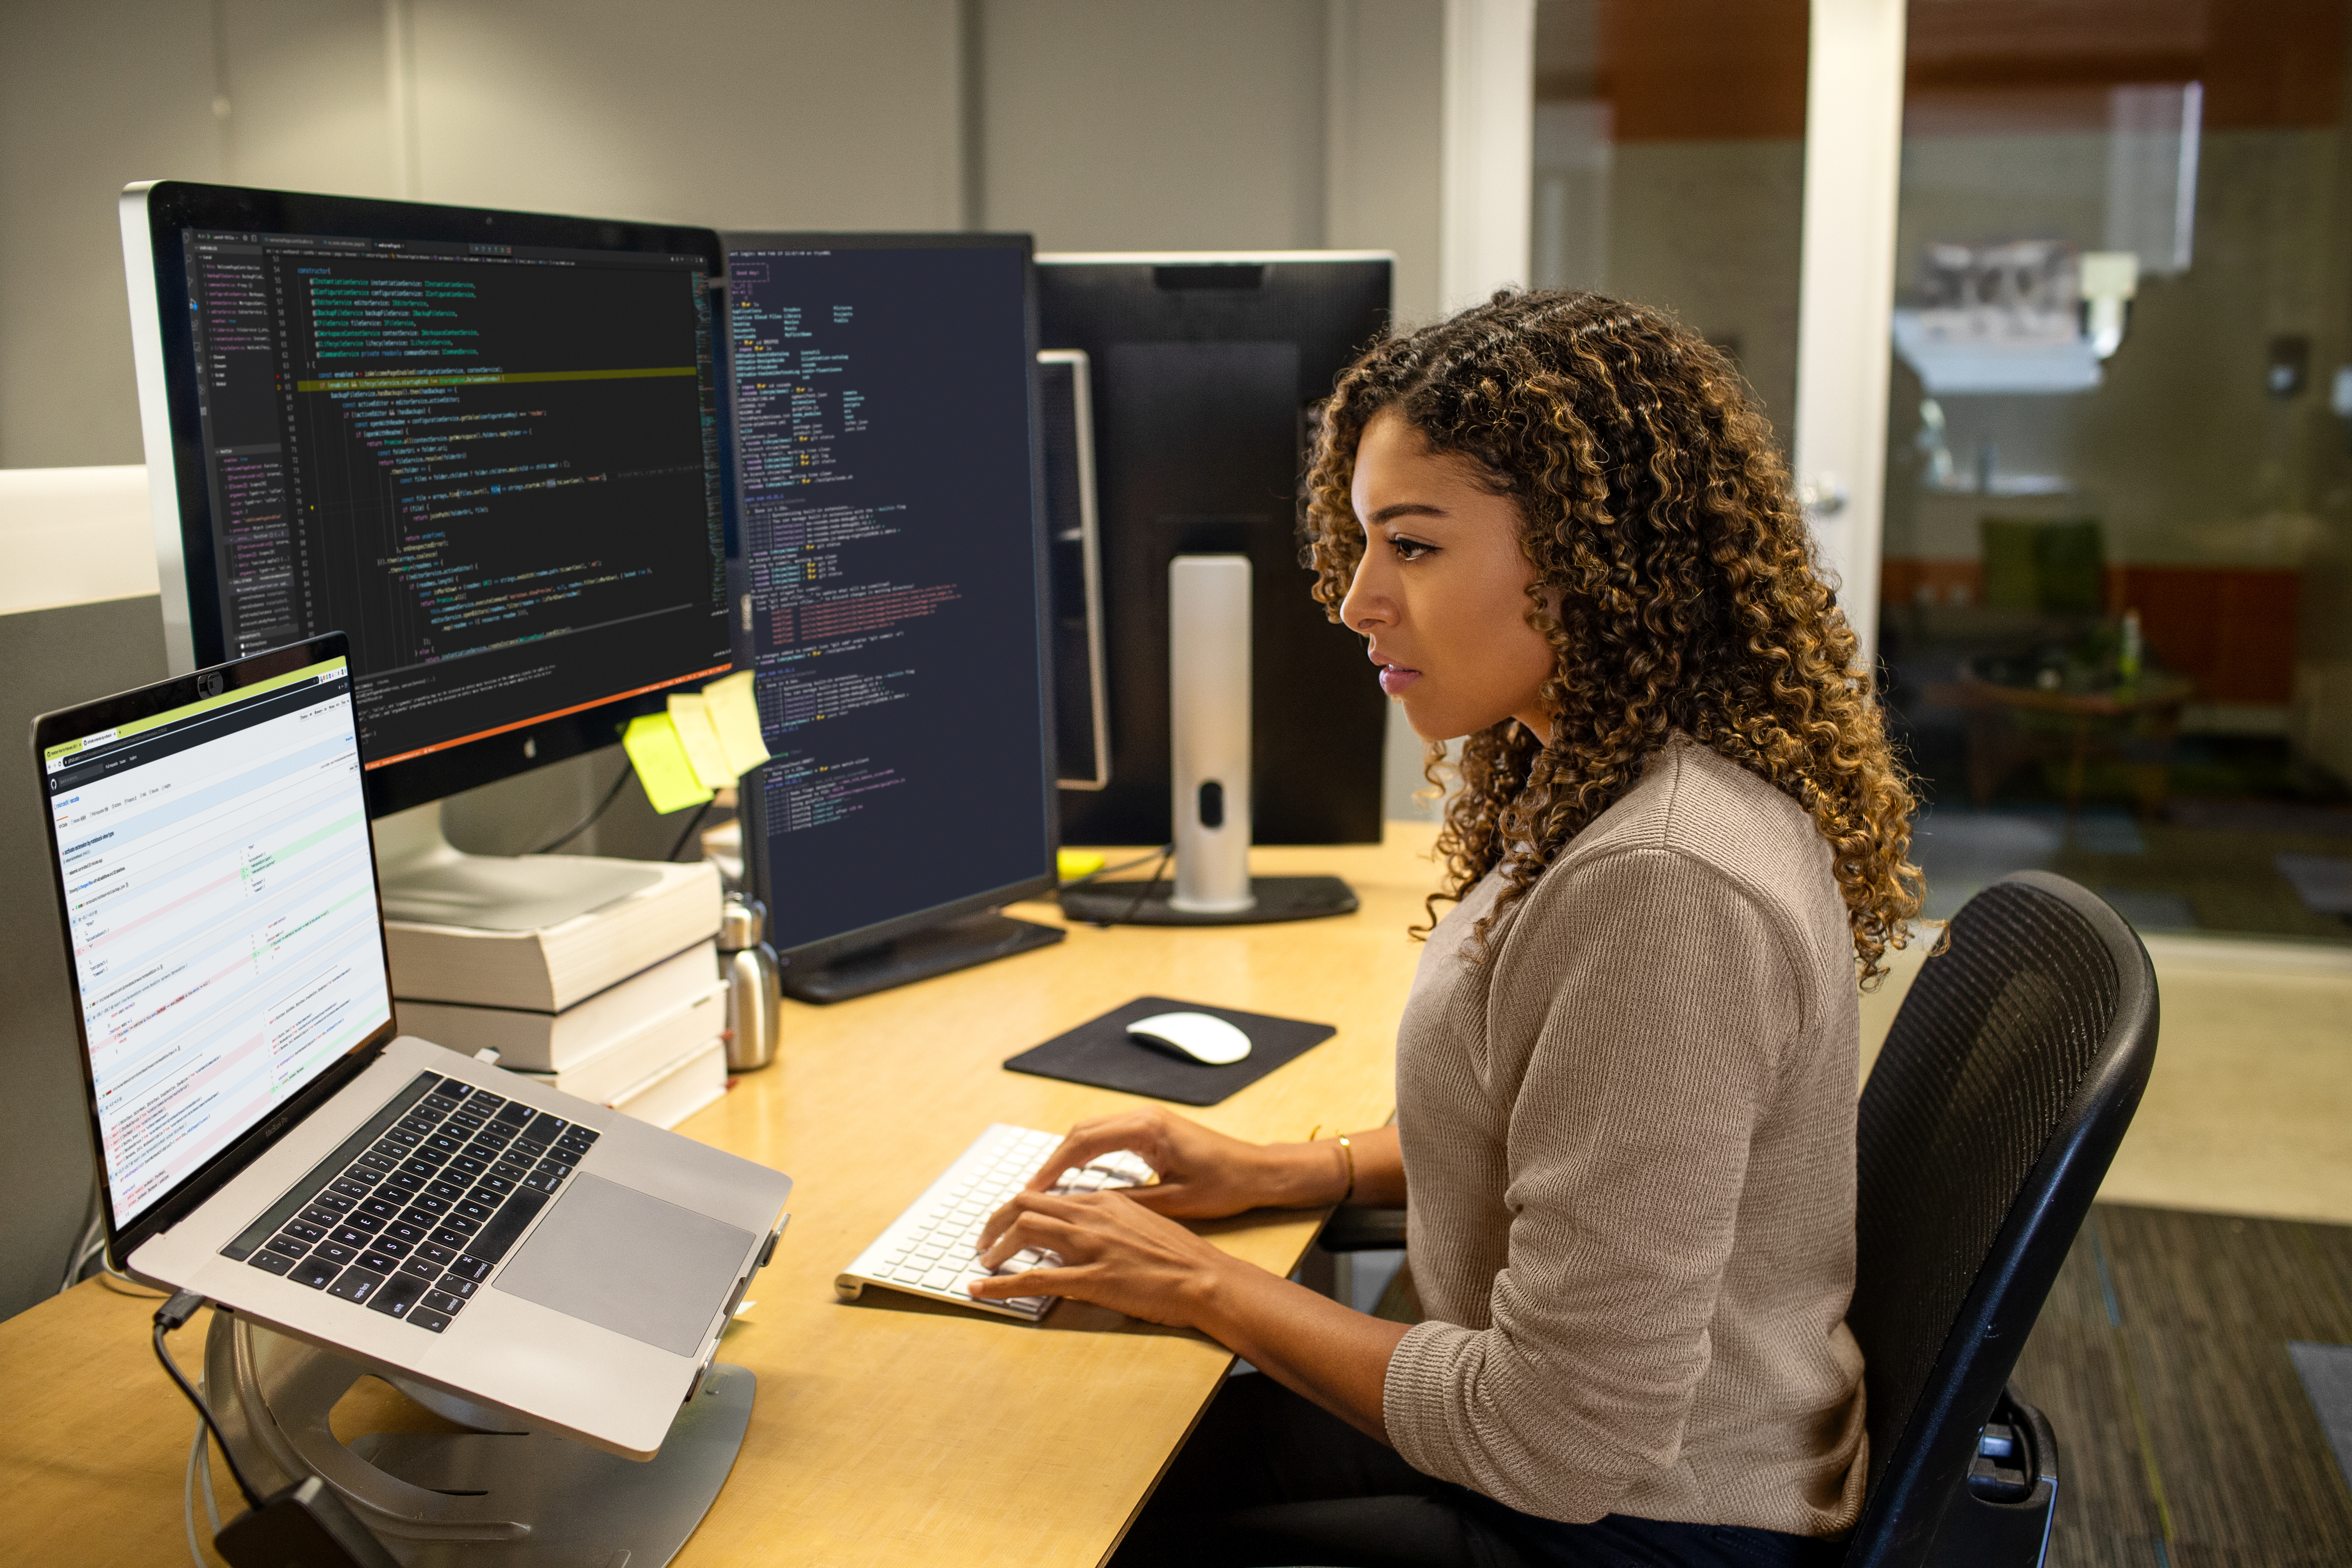 Real people, real offices. Black female developer working at enterprise office workspace. Focused work. She has customized her workspace with a multi-monitor set up. Women who code, women developers, women engineers, code, develop, Black developer, engineer, Visual Studio, Azure.